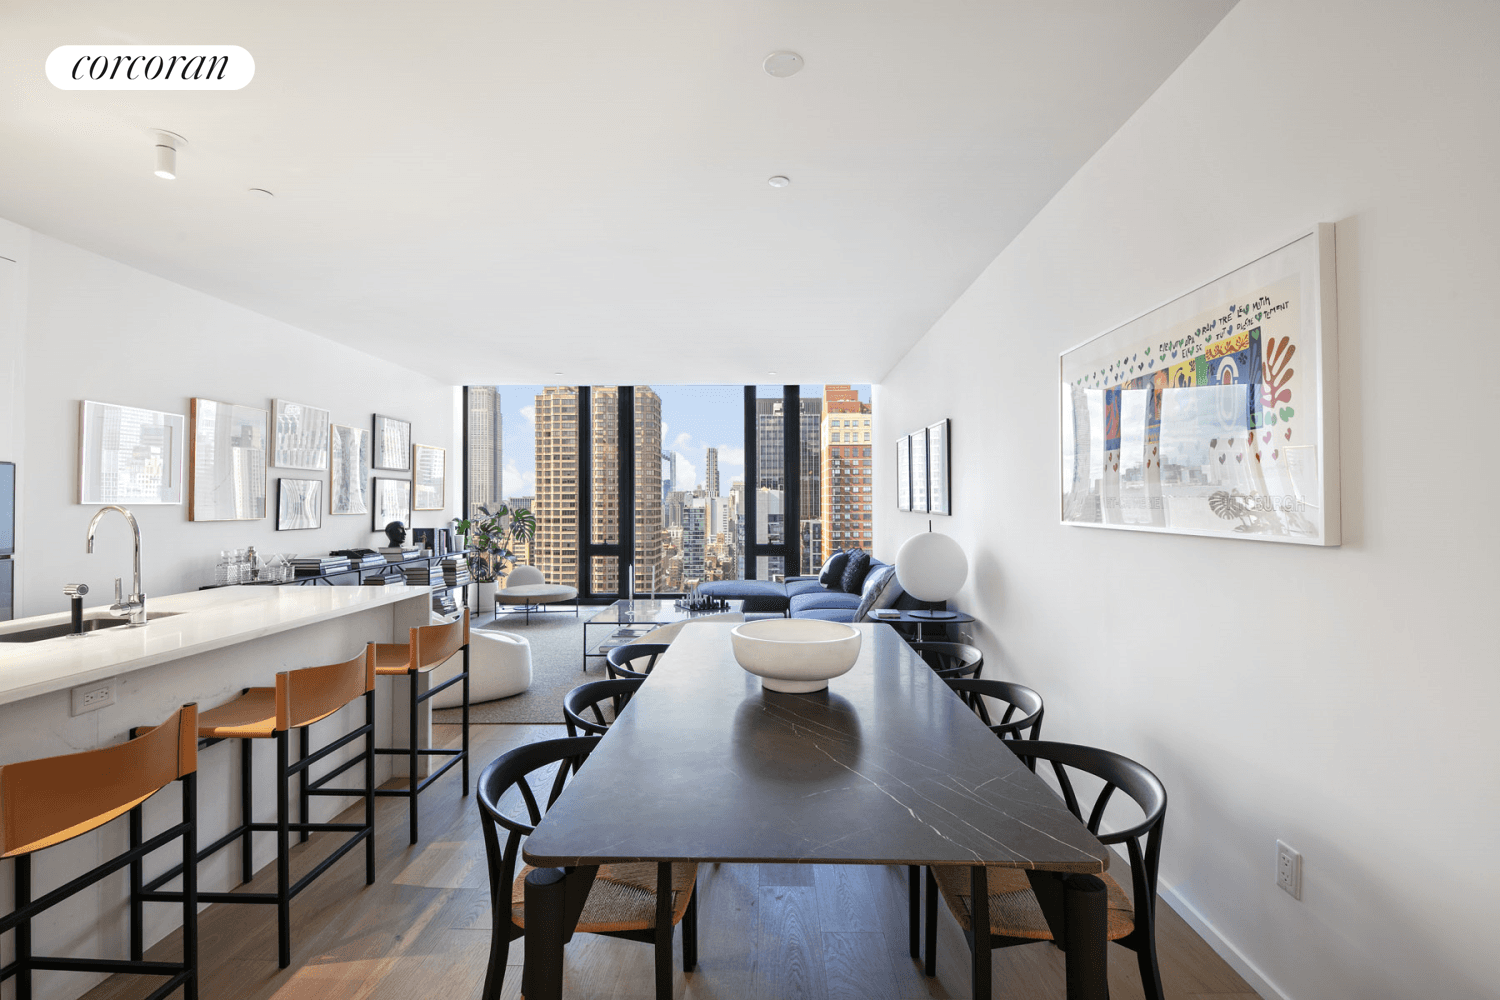 Residence 39F at One United Nations Park is a 1, 640sf two bedroom, two bathroom plus powder room, boasting Manhattan skyline views including the Empire State and Chrysler buildings.